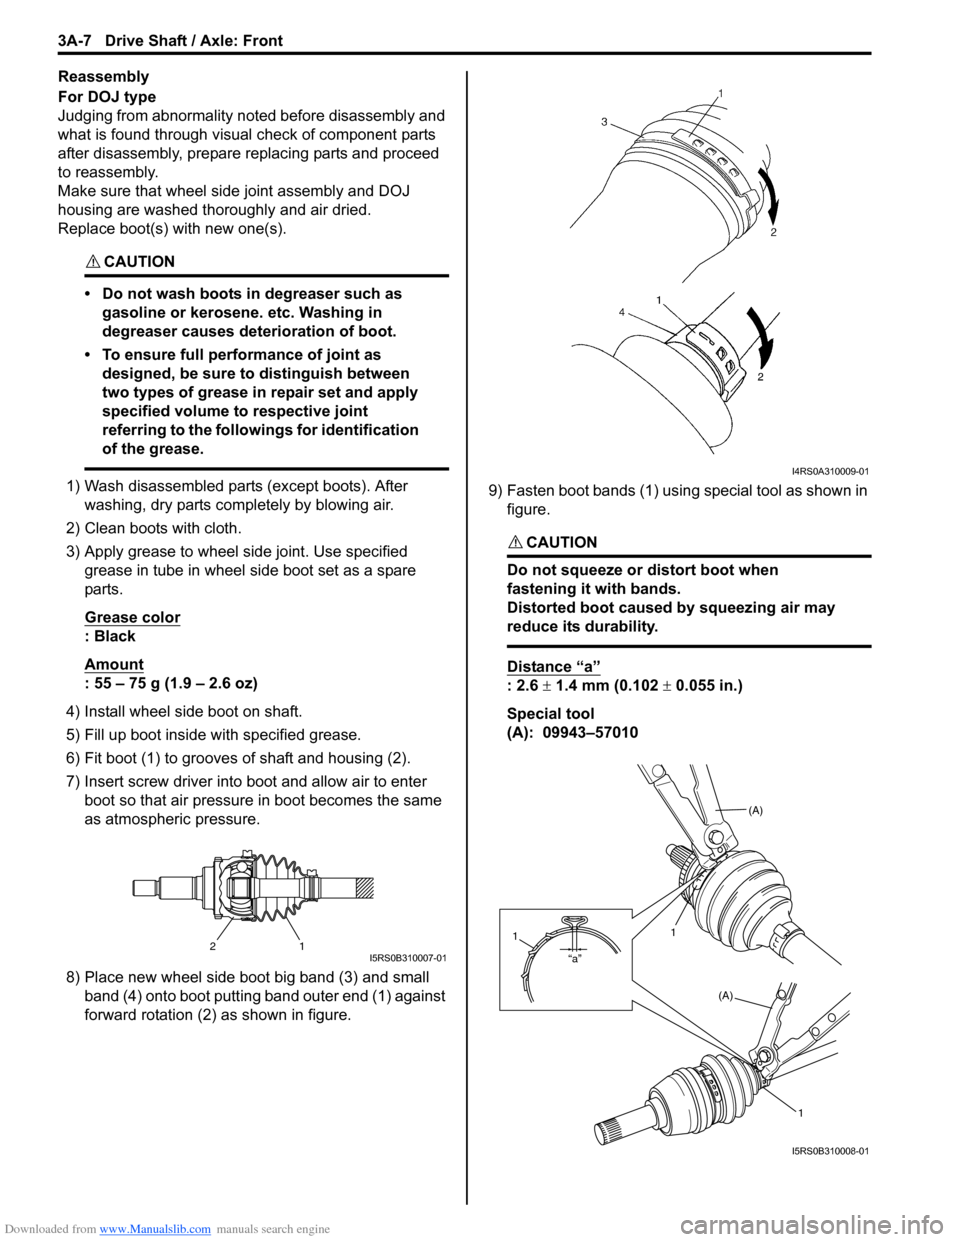 SUZUKI SX4 2006 1.G Service Workshop Manual Downloaded from www.Manualslib.com manuals search engine 3A-7 Drive Shaft / Axle: Front
Reassembly
For DOJ type
Judging from abnormality noted before disassembly and 
what is found through visual chec